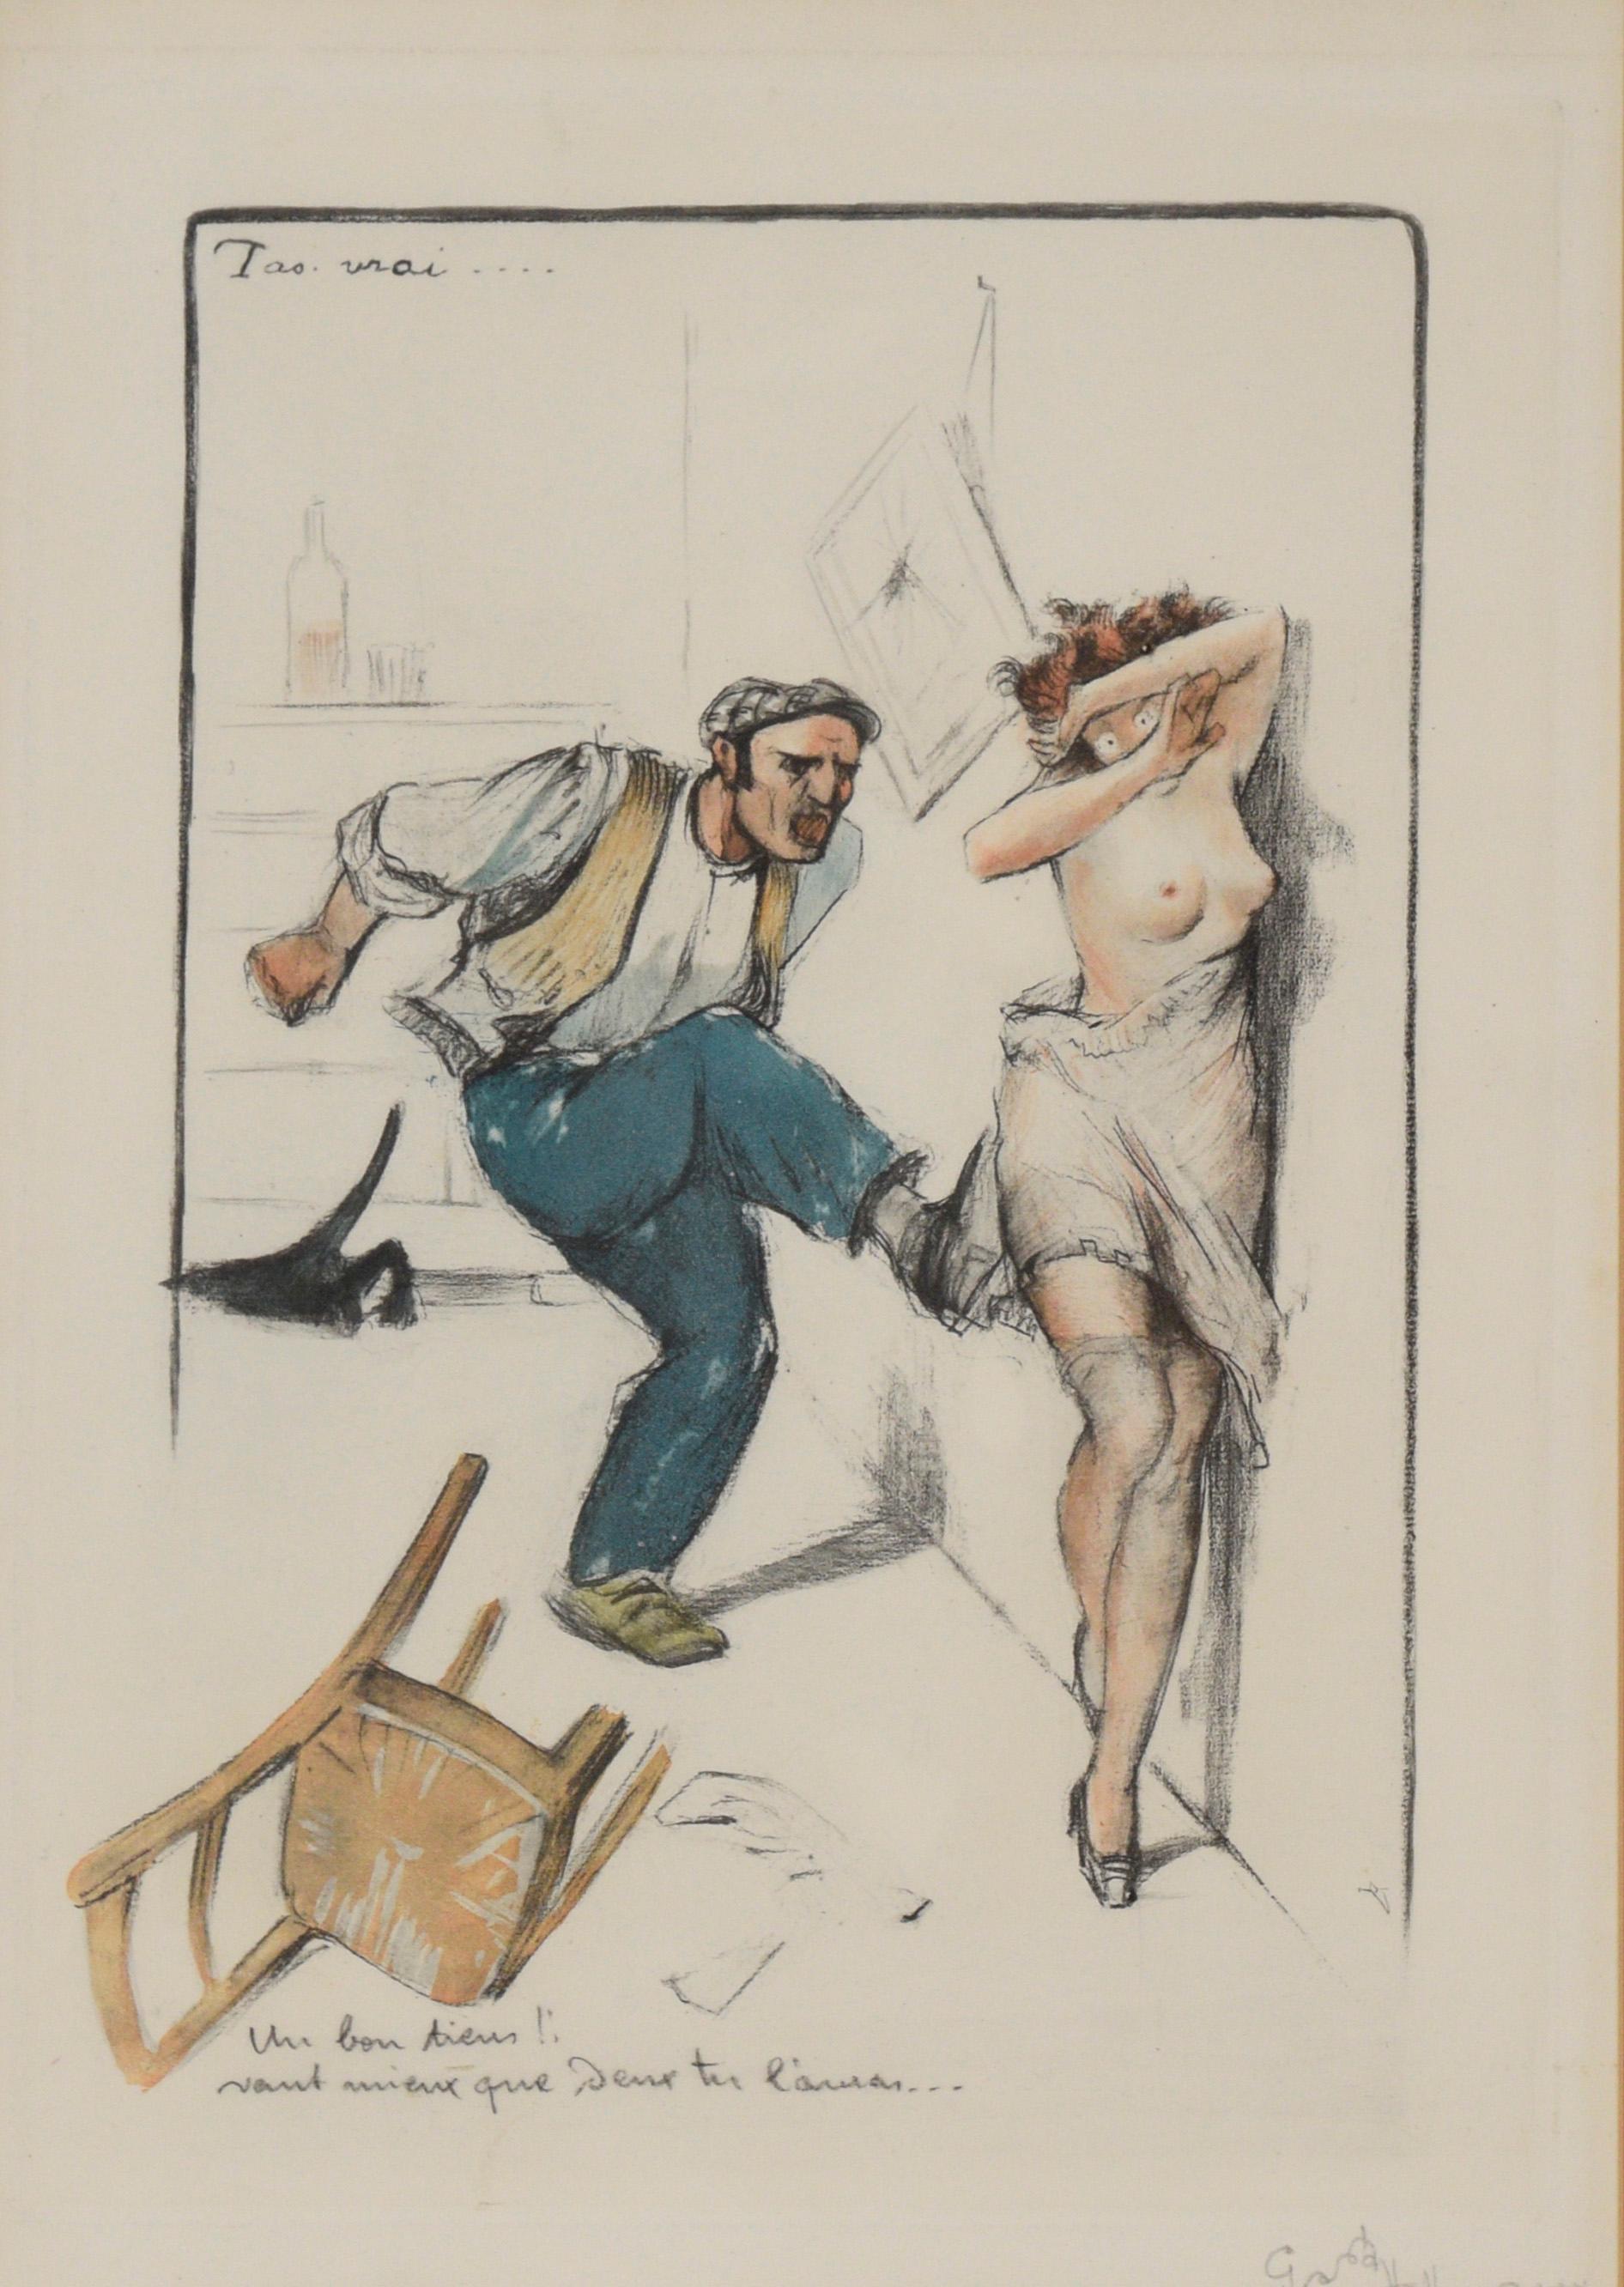 Satirical French Illustration of Man and Woman

Comical illustration by Gaston Hoffmann (French, 1883-1967) titled 